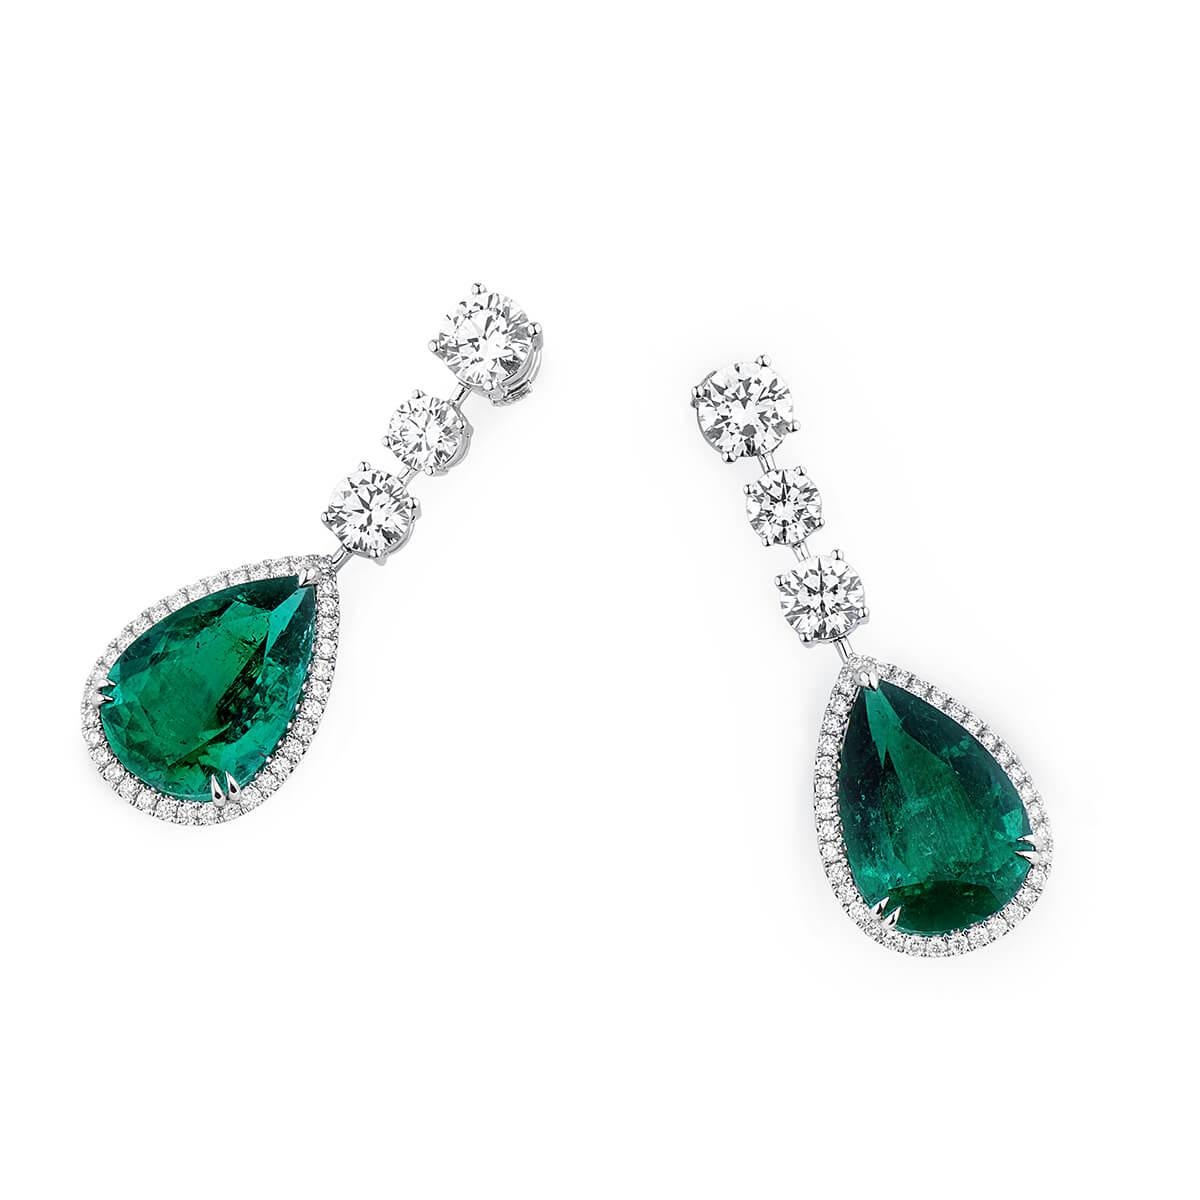 These contemporary earrings host a total of 20.75 Carat Natural unheated vivid Green Emerald and additional natural white diamonds, making up a total of 25.93 Carats. 

According to ancient myths, emeralds were thought to guard against memory loss